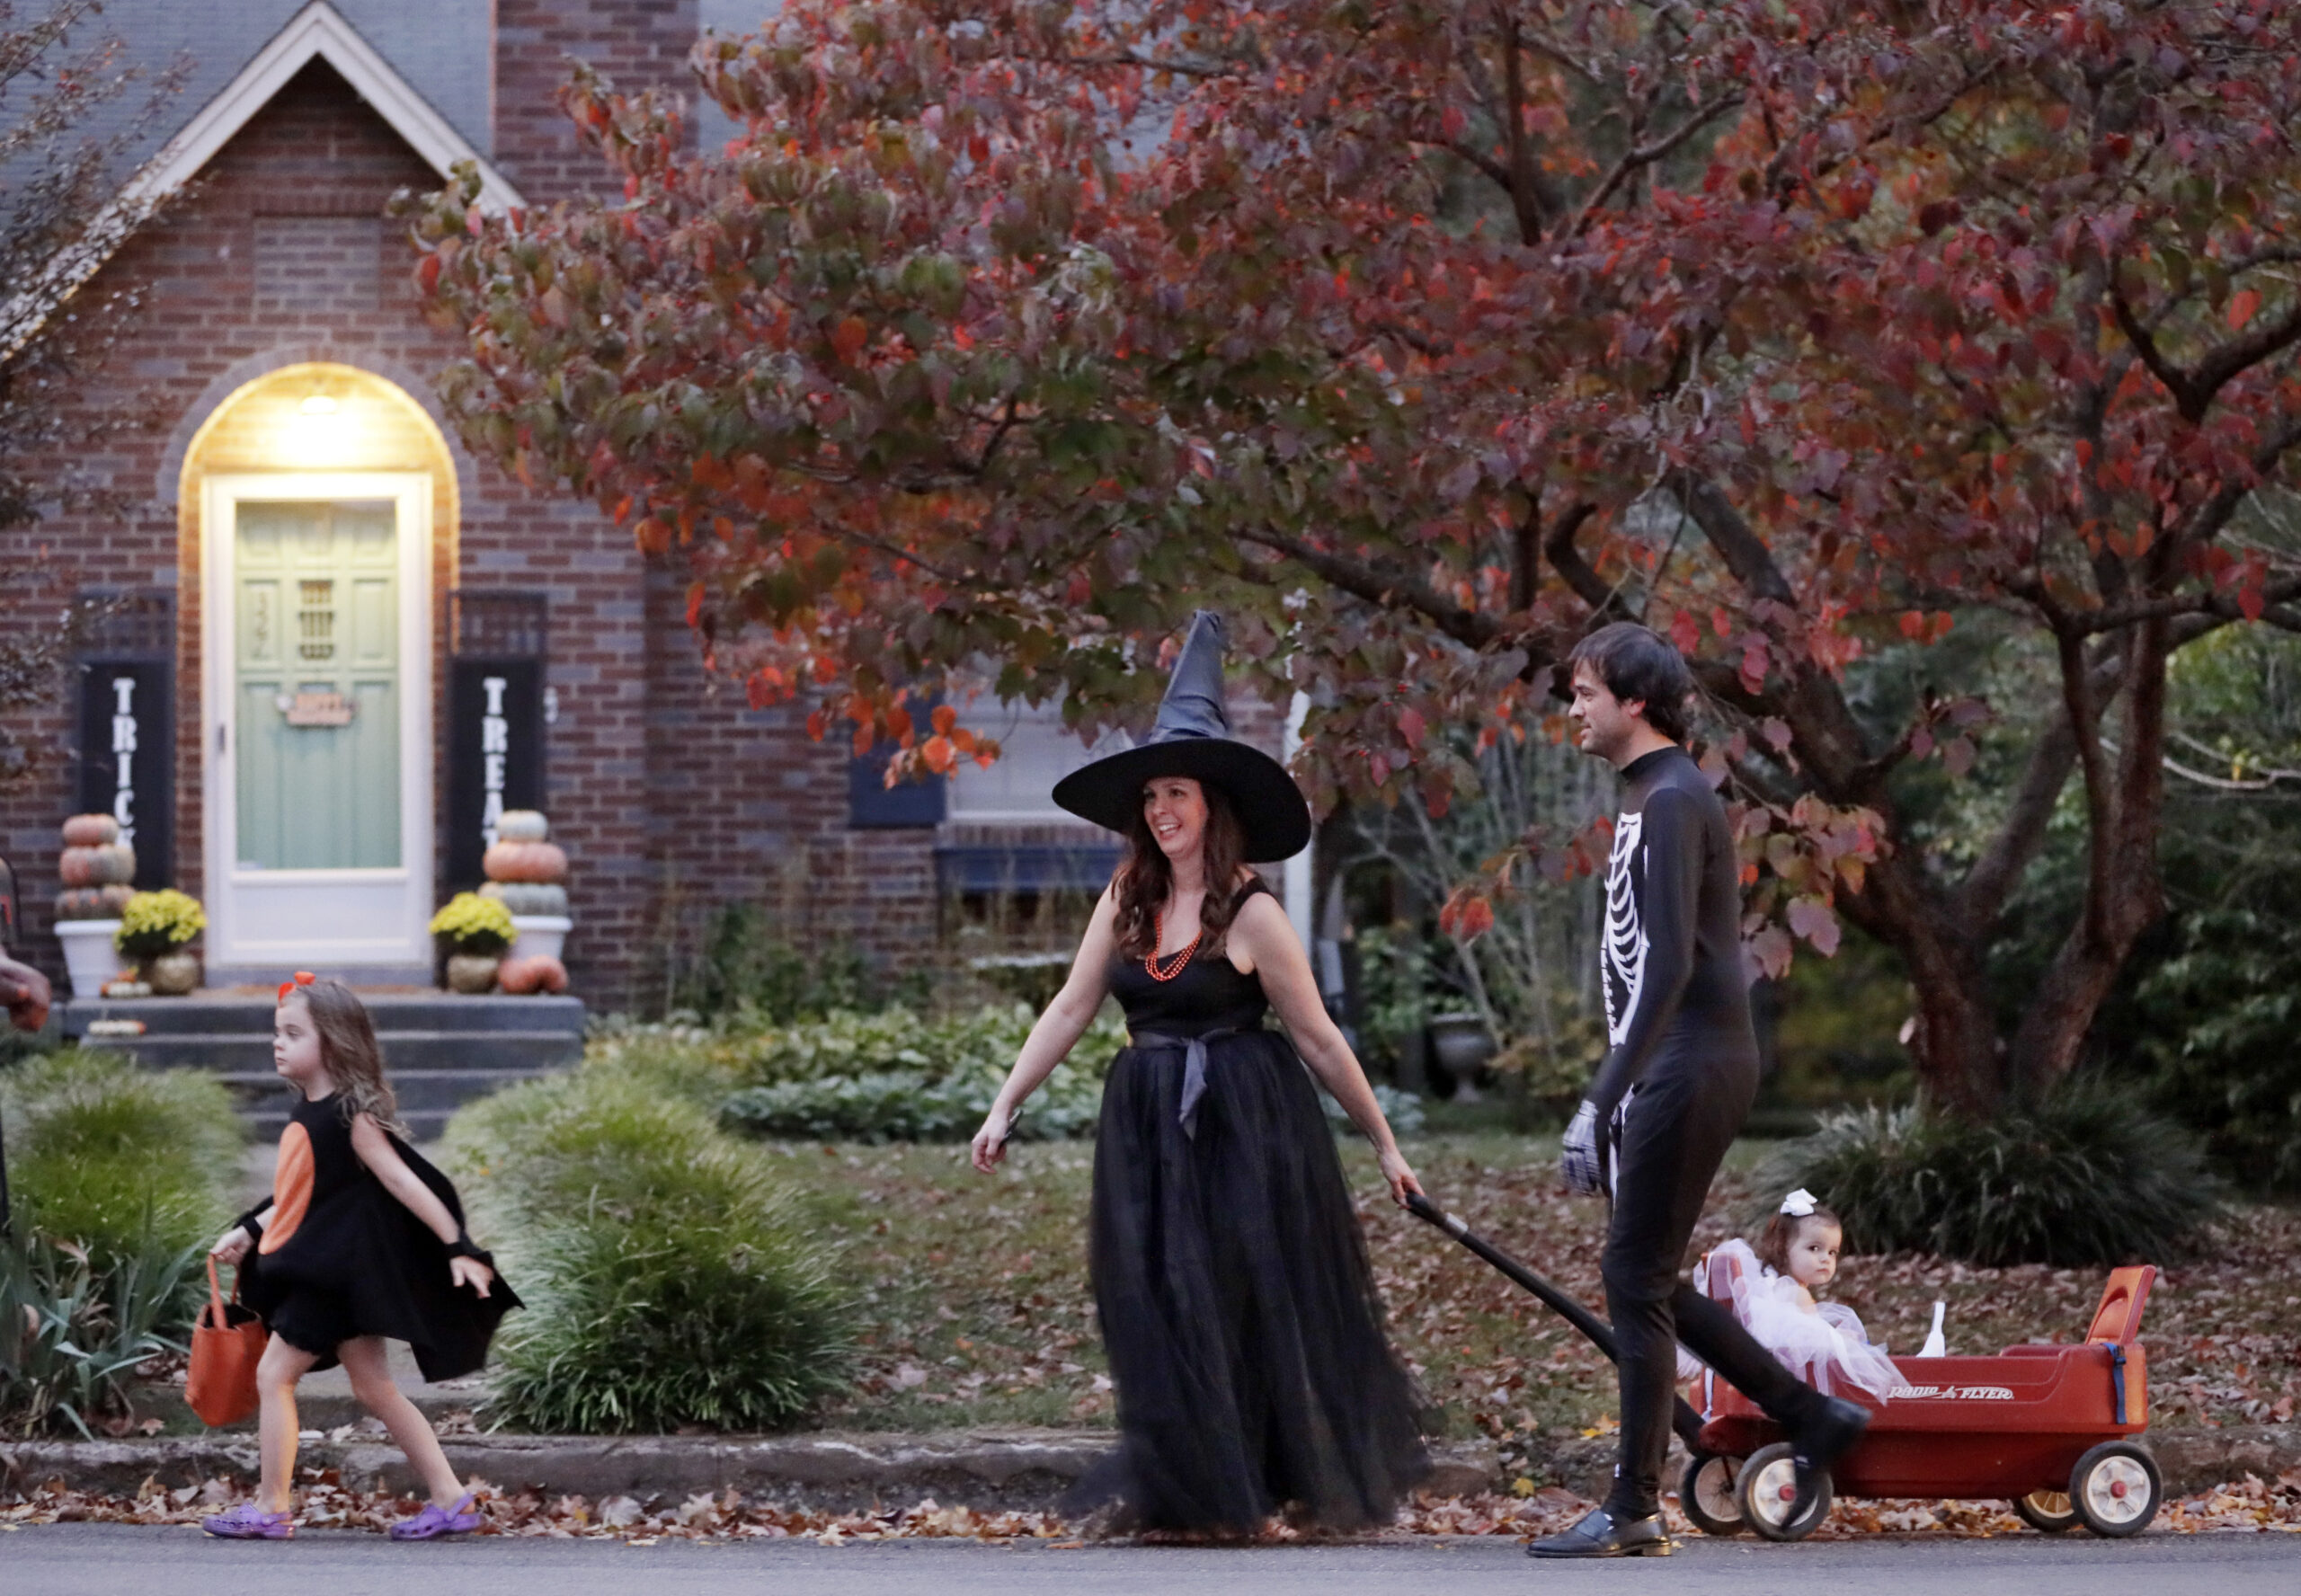 Three people go trick or treating in costumes.